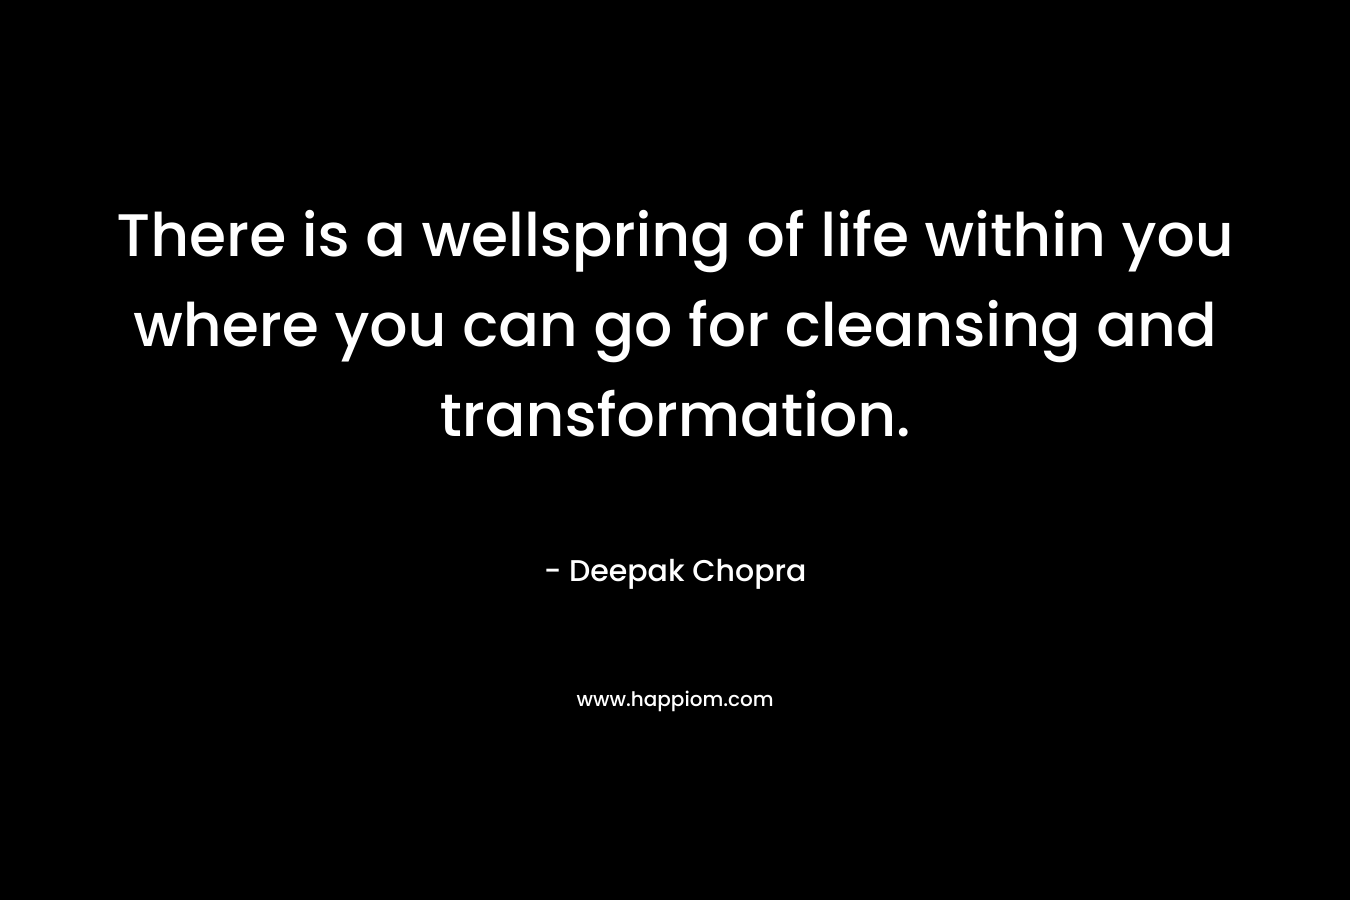 There is a wellspring of life within you where you can go for cleansing and transformation. – Deepak Chopra